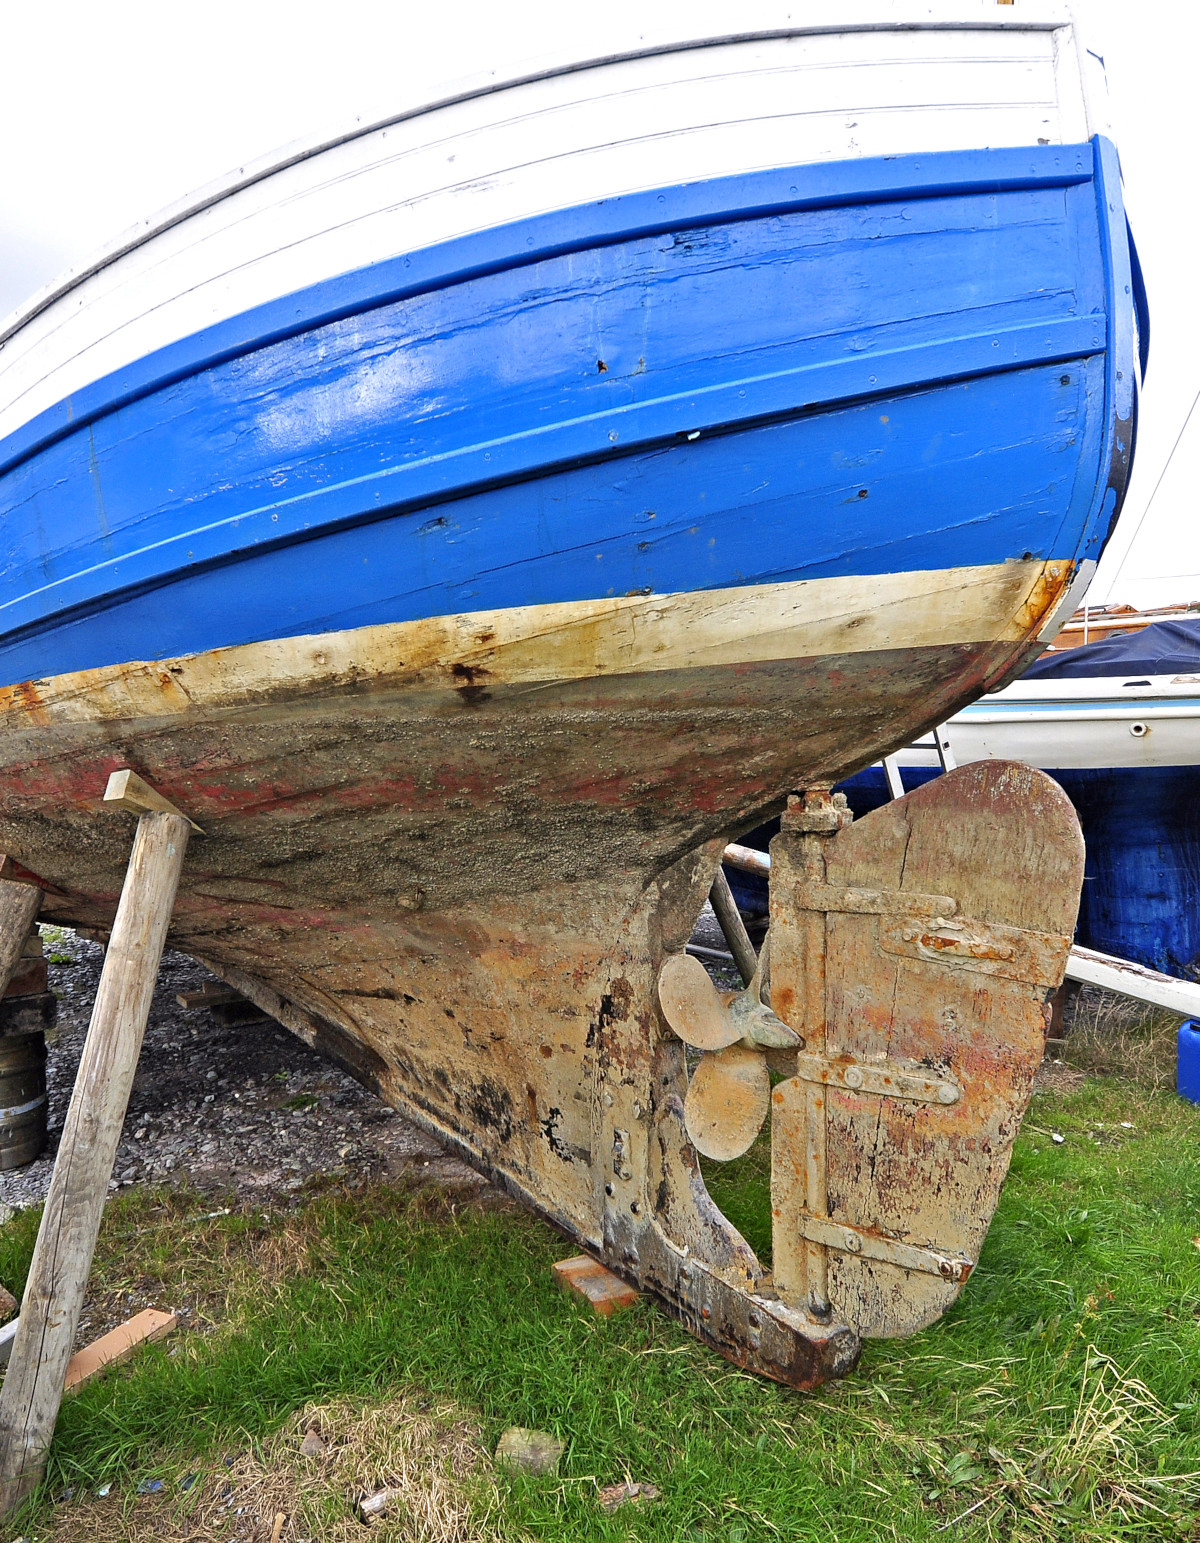 Fishing boats for sale - Scotland